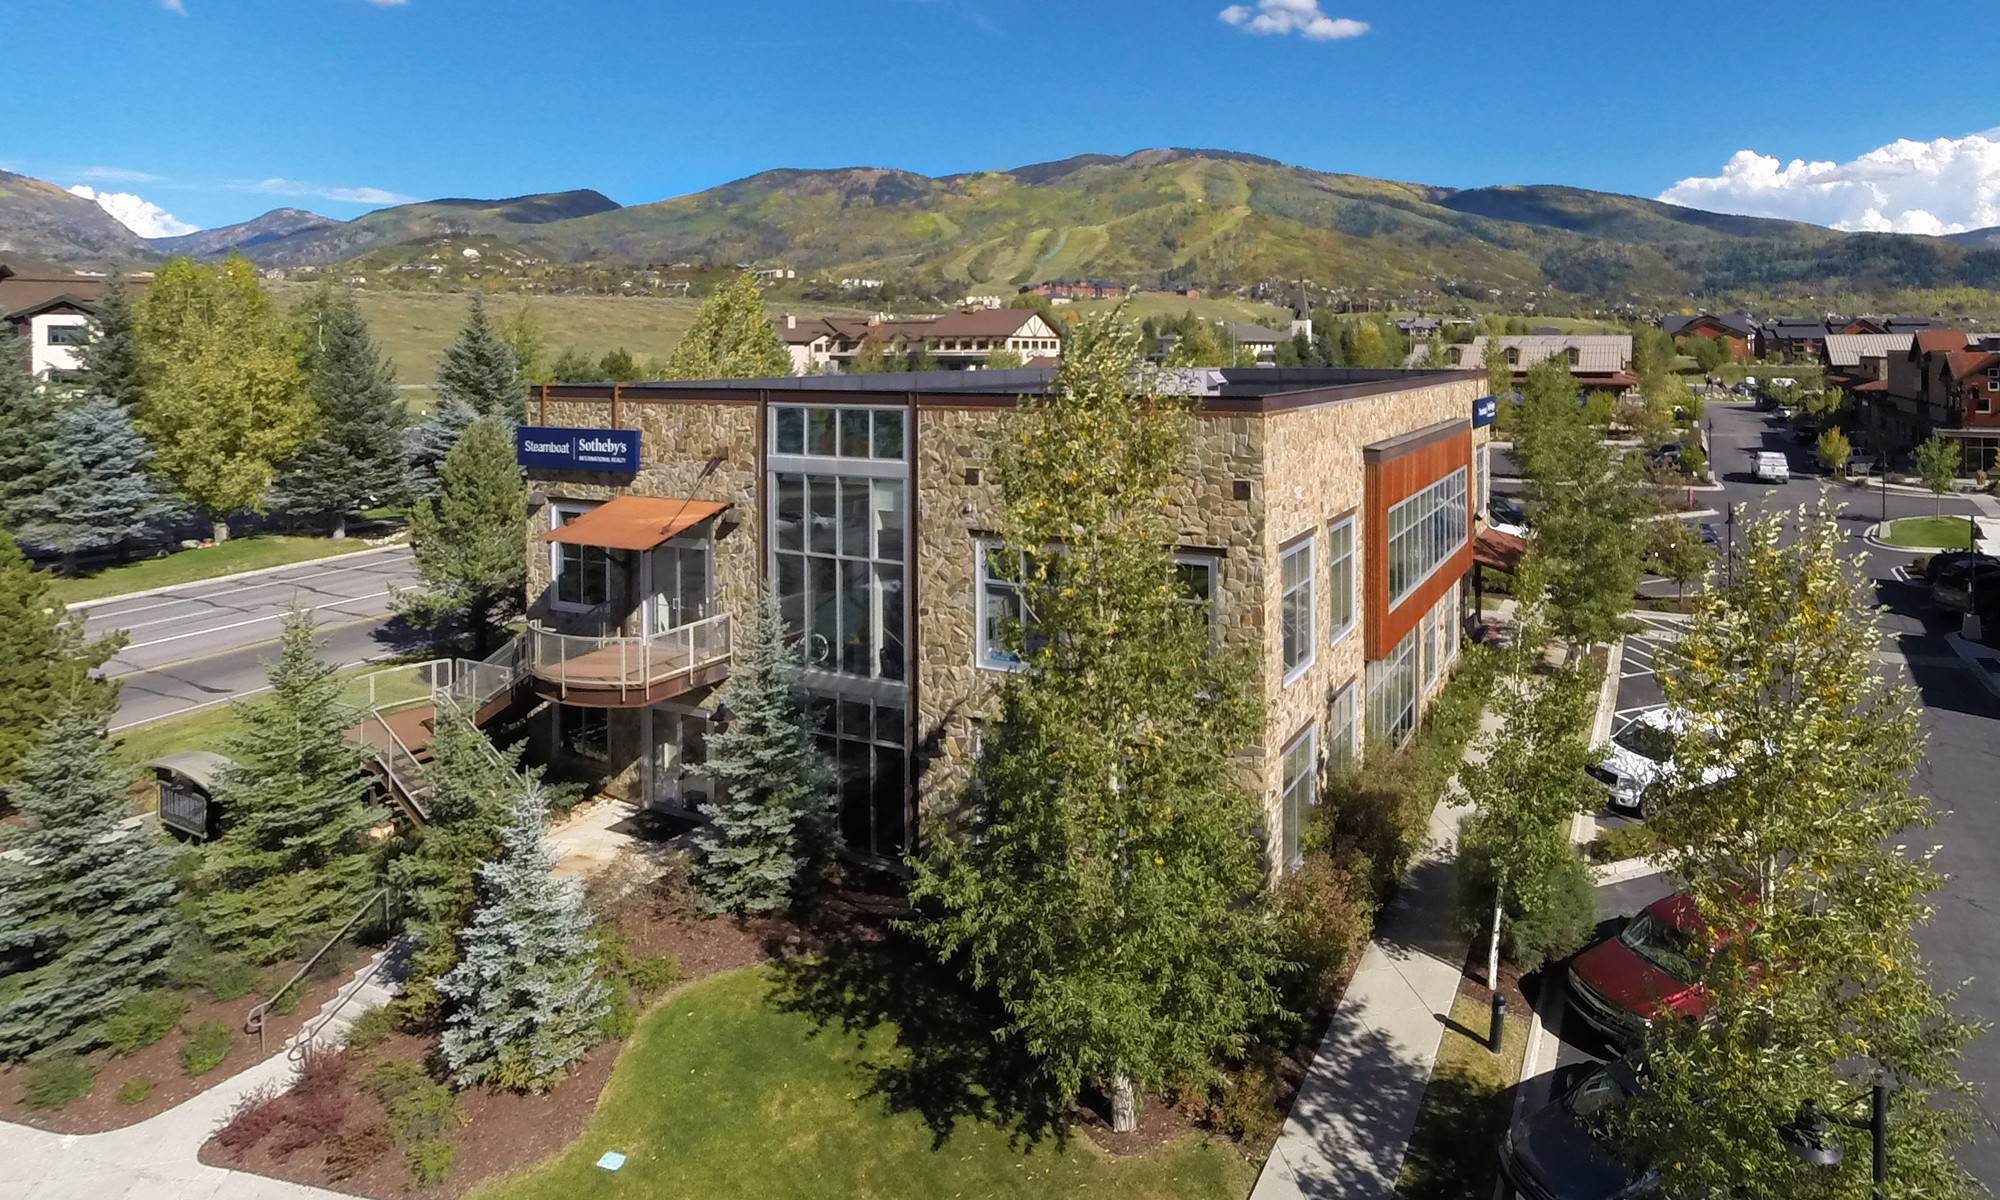 Steamboat Sotheby's International Realty - Main Office